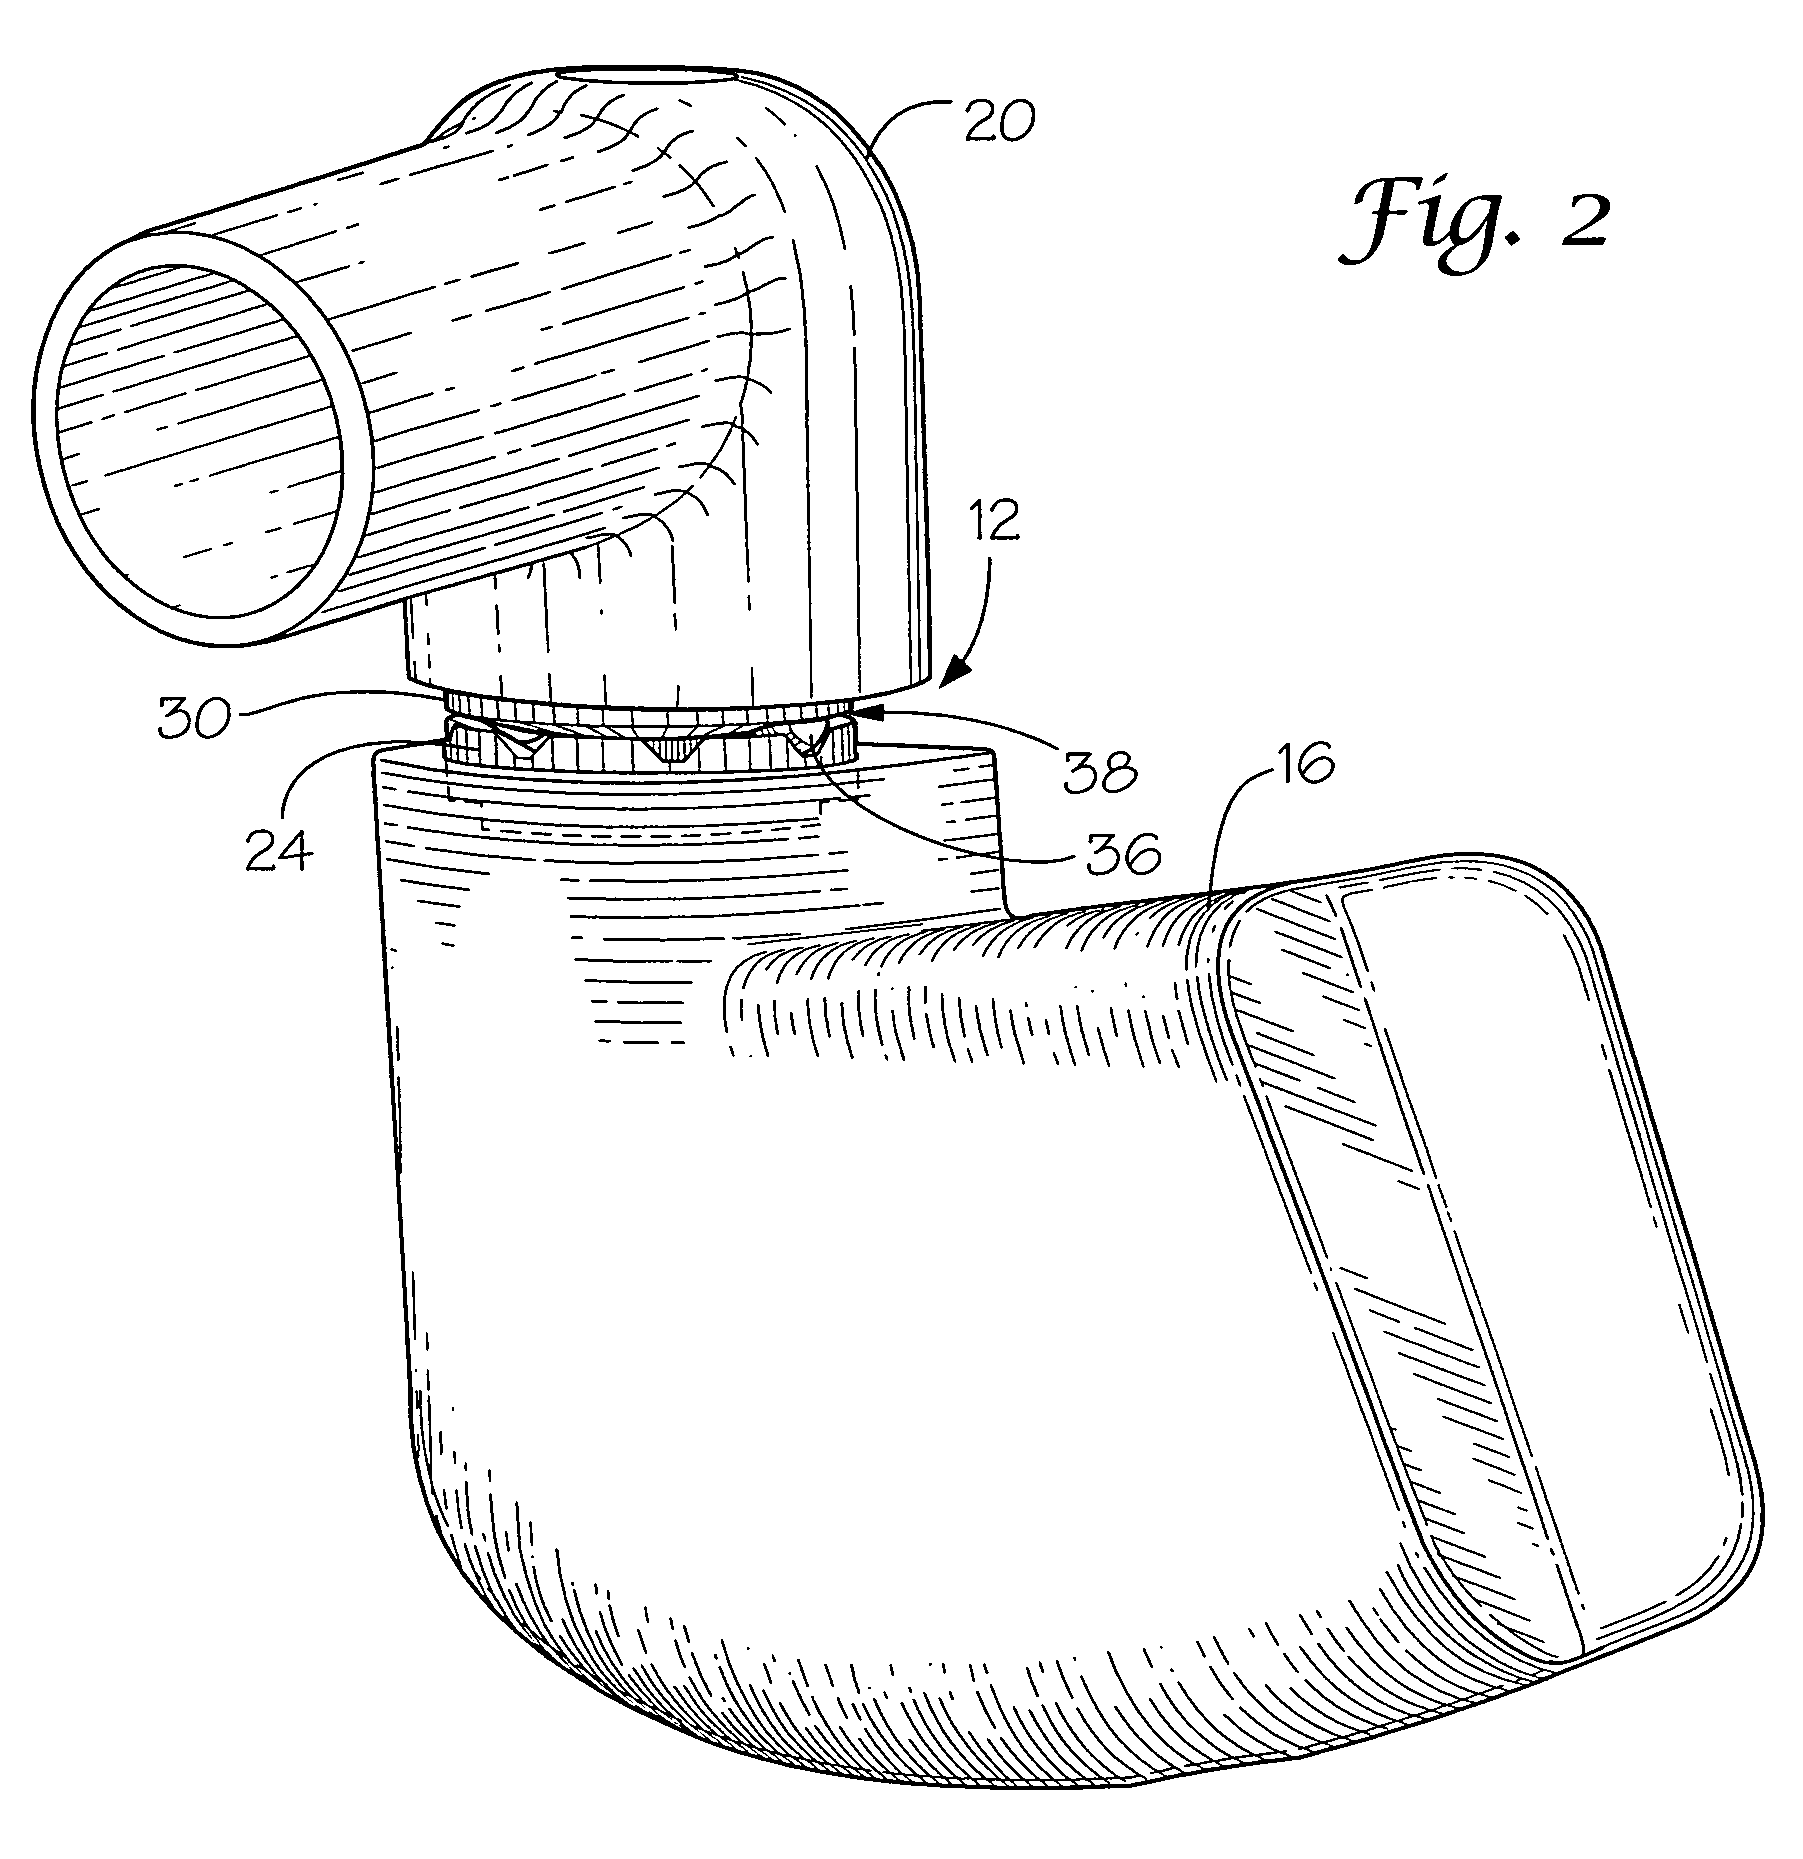 Multi-axis pivoting detent joint assembly for an exterior vehicle mirror